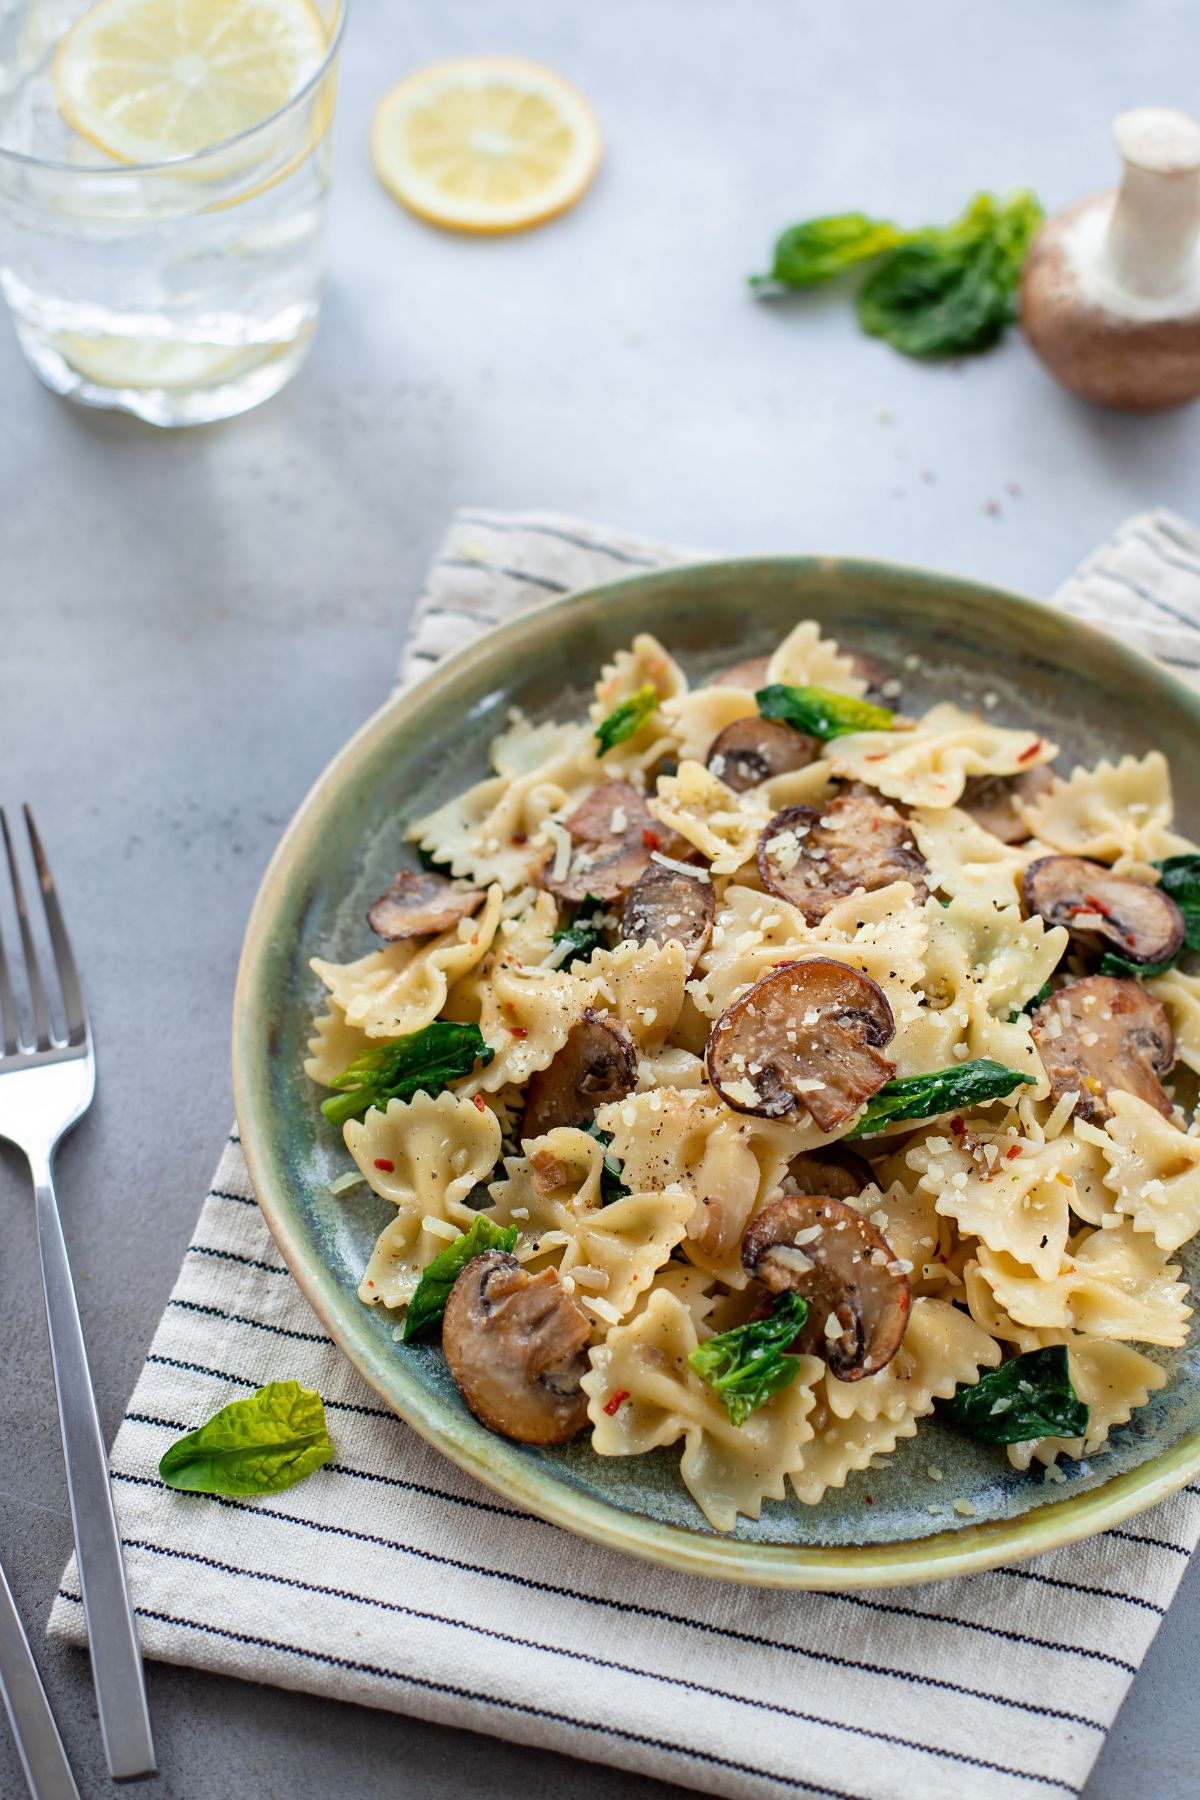 $10 Pasta Dinner Recipes Your Guests Will Love